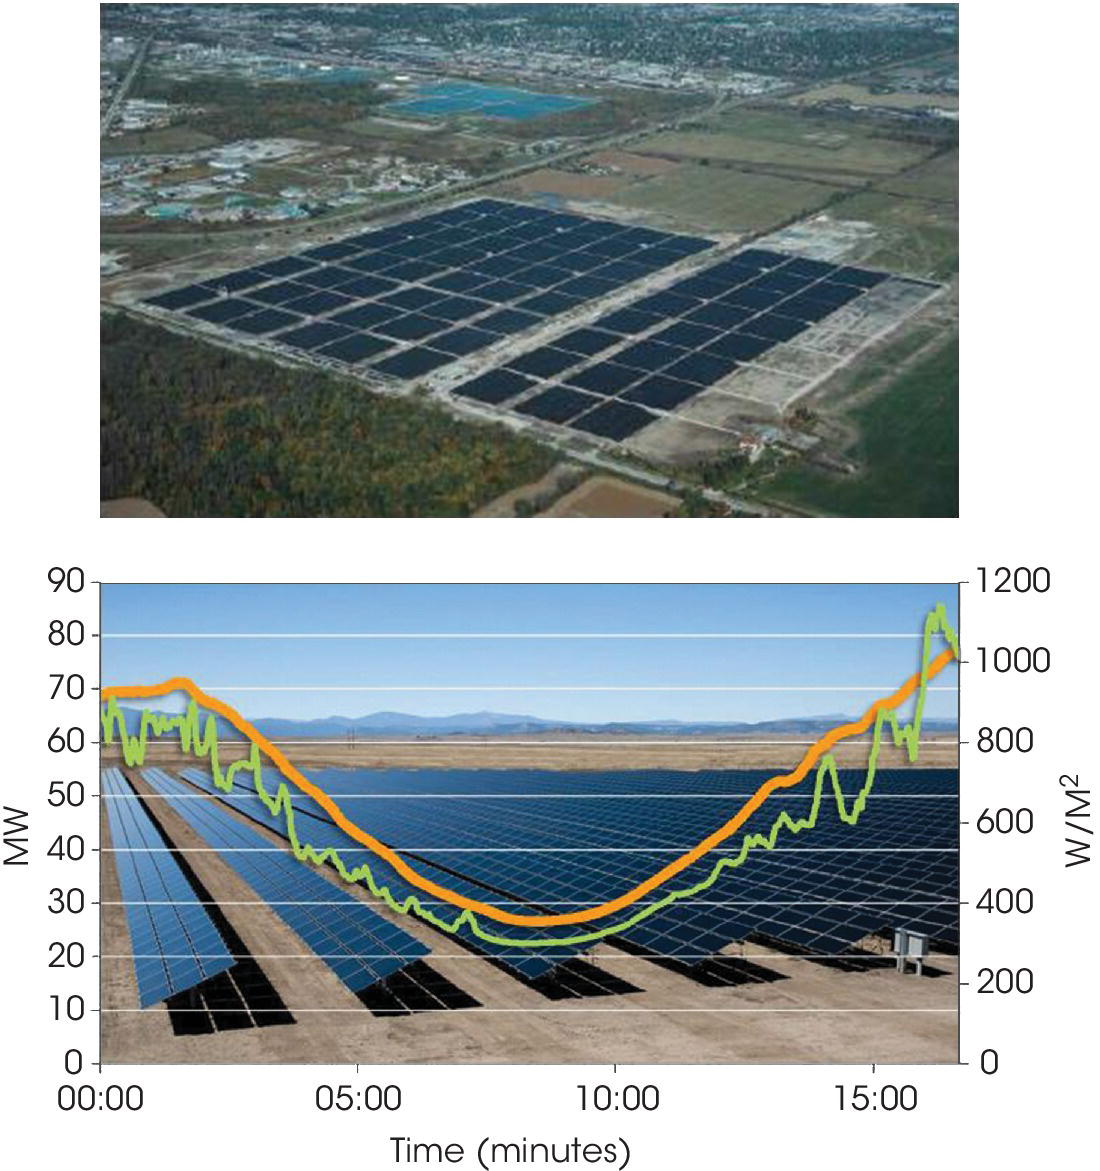 Top: Aerial view of the solar plant in Ontario, Canada. Bottom: Graph displaying the close-up view of the plant with 2 curves, illustrating the impact of cloud passage on an 80 MW plant power output.